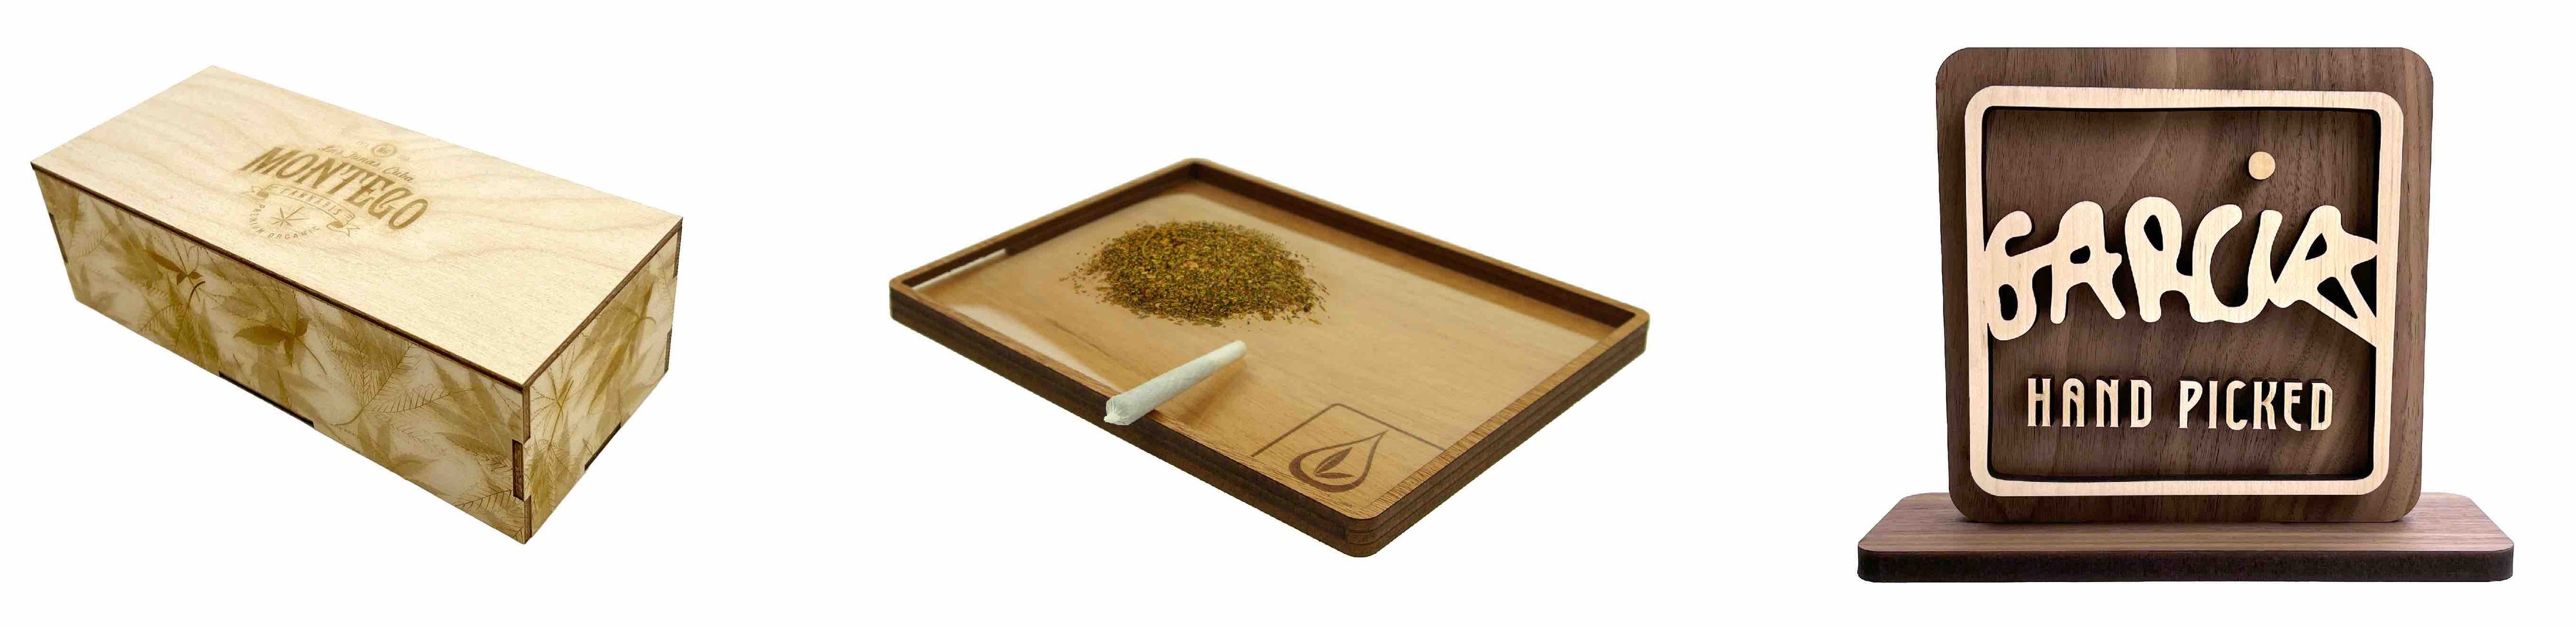 rolling tray retail signage